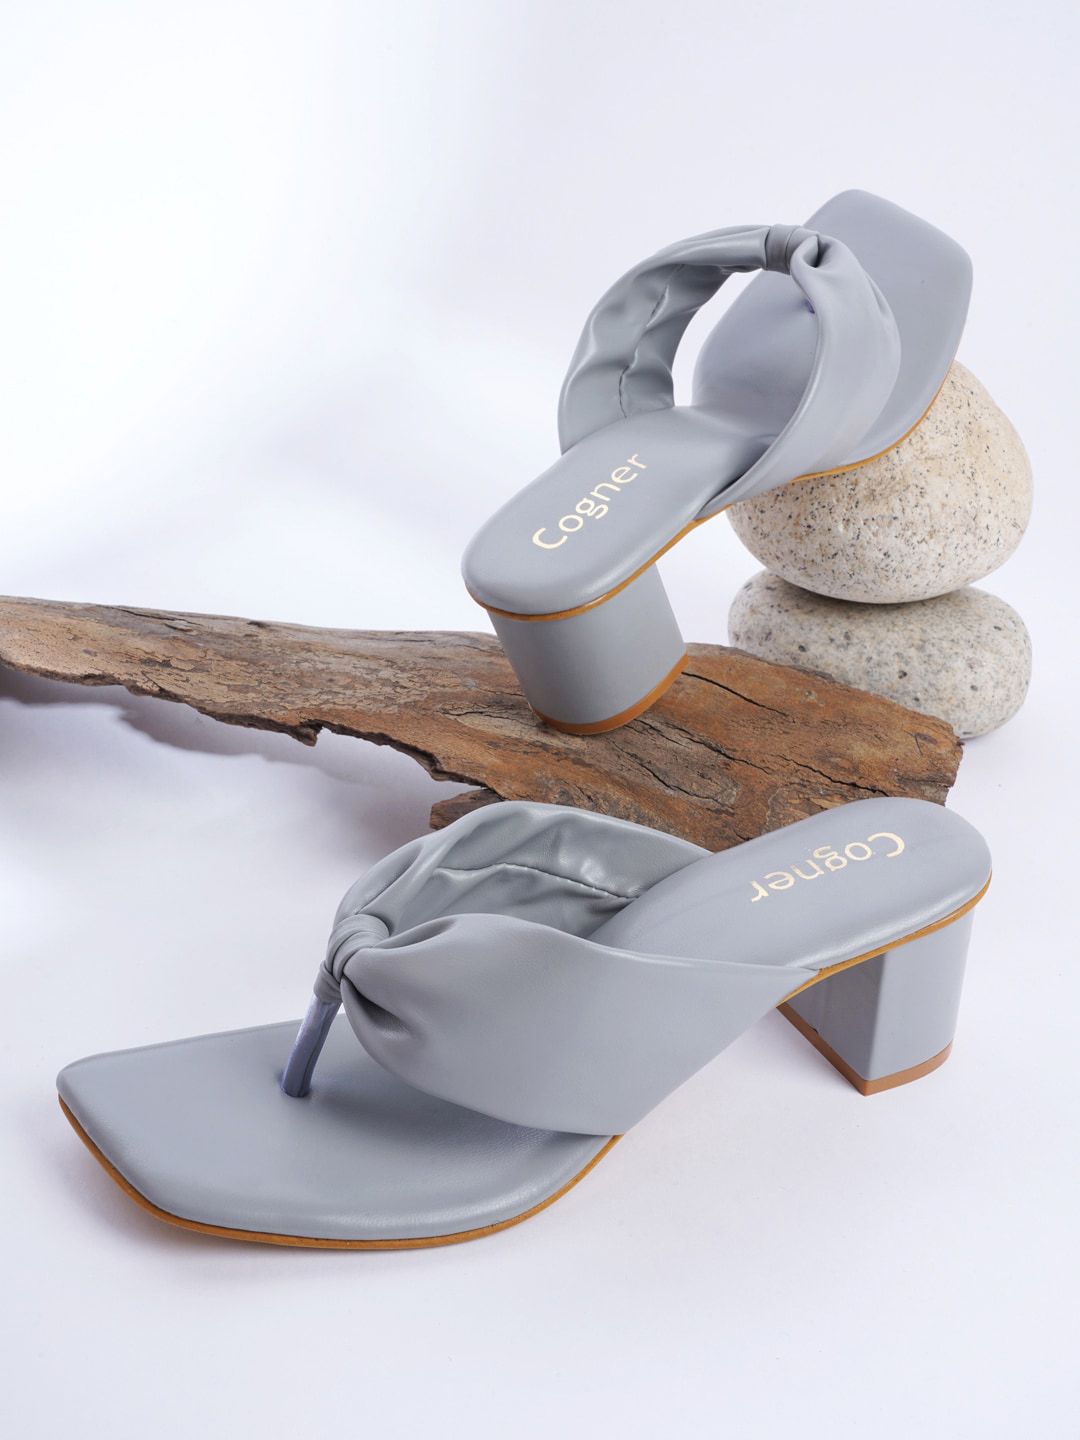 Cogner Grey Party Block Sandals with Bows Price in India